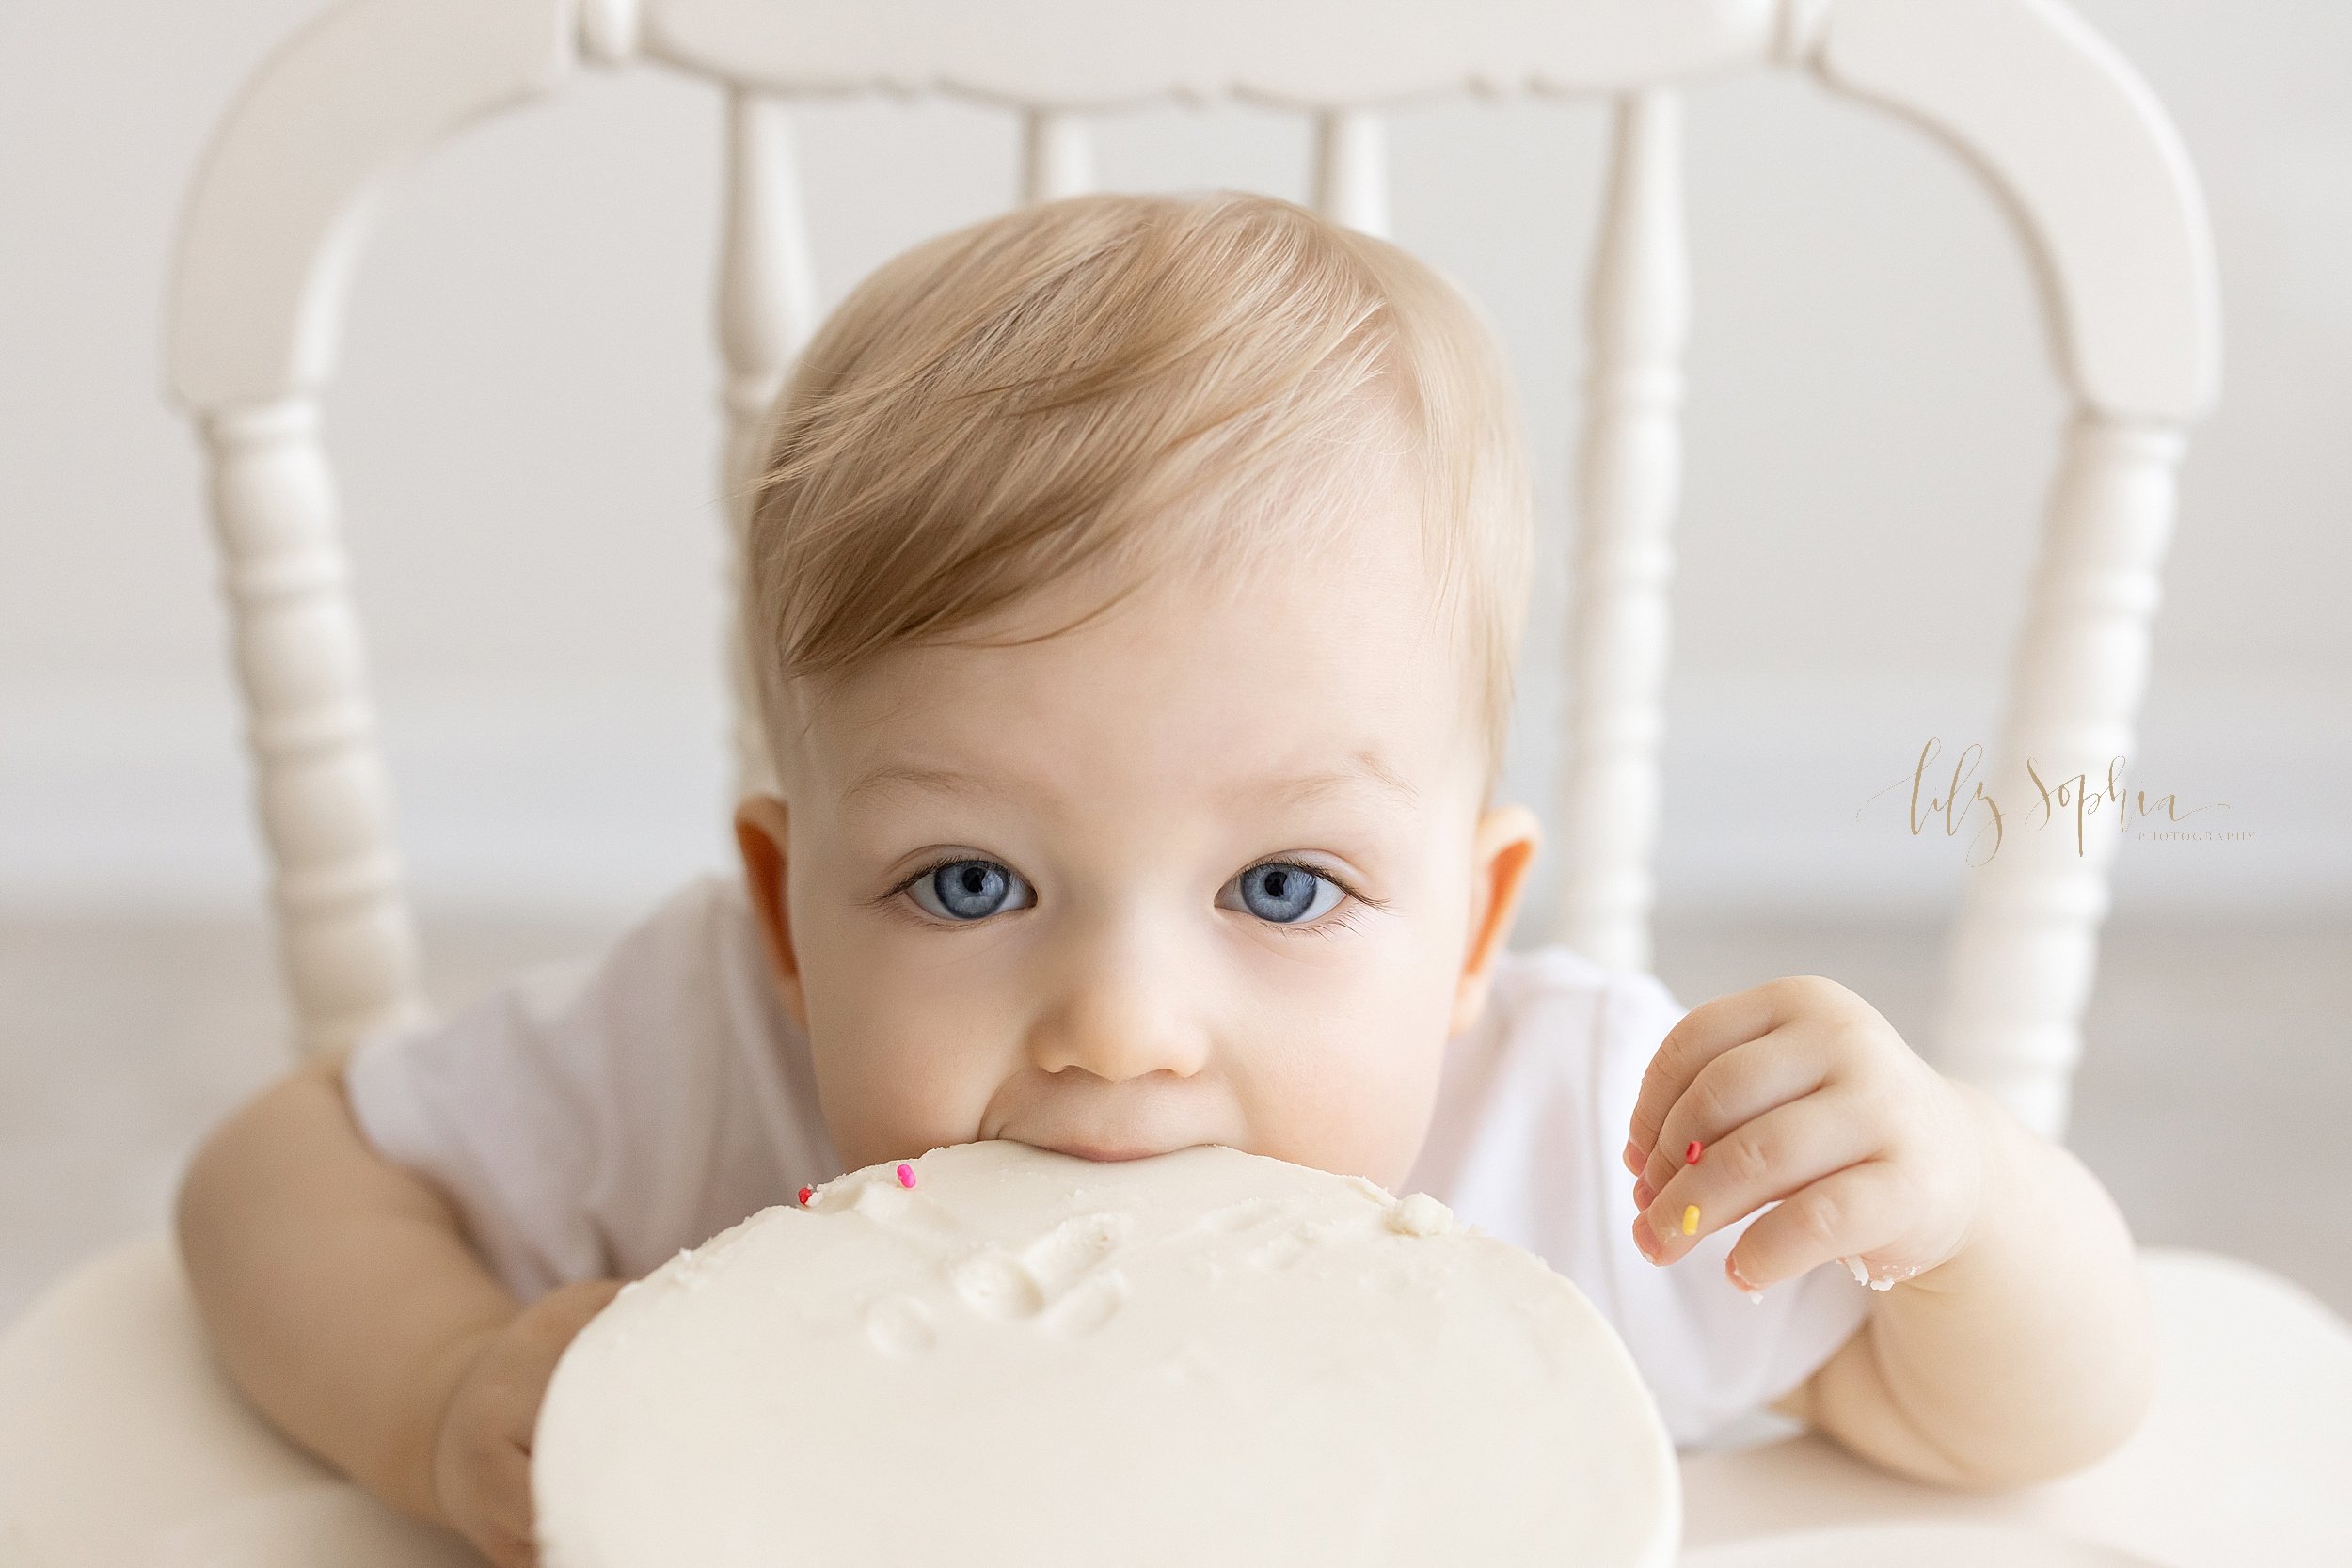  First birthday photo session of a one year old blue eyed boy as he sits in an antique high chair and bites into his smash cake taken in natural light in a studio near Buckhead in Atlanta, Georgia. 